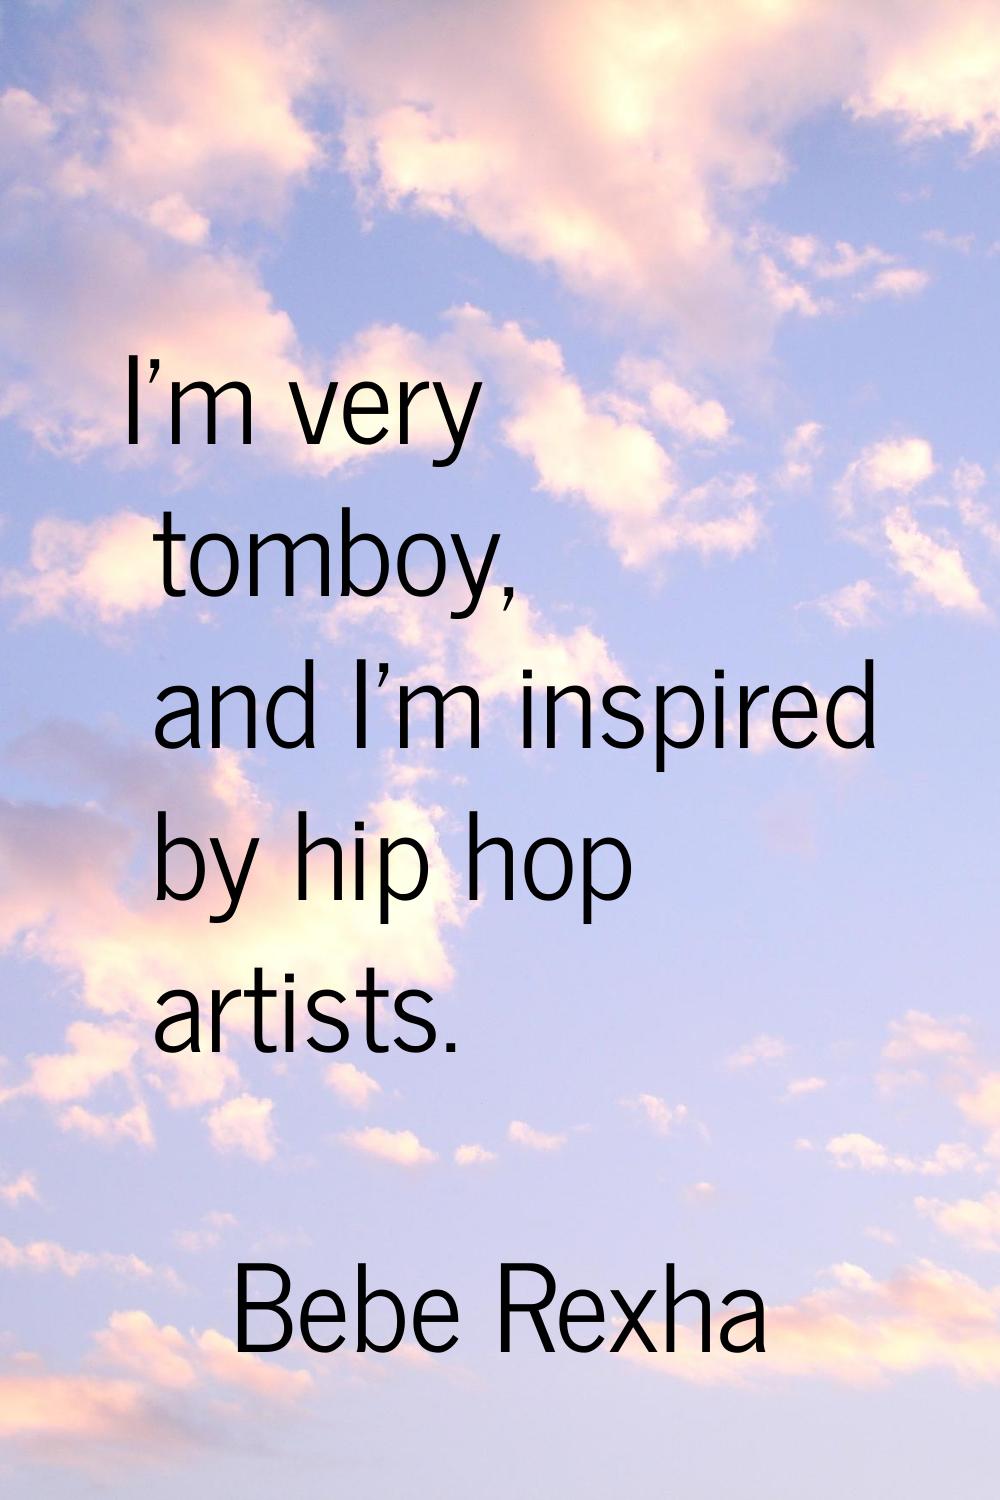 I'm very tomboy, and I'm inspired by hip hop artists.